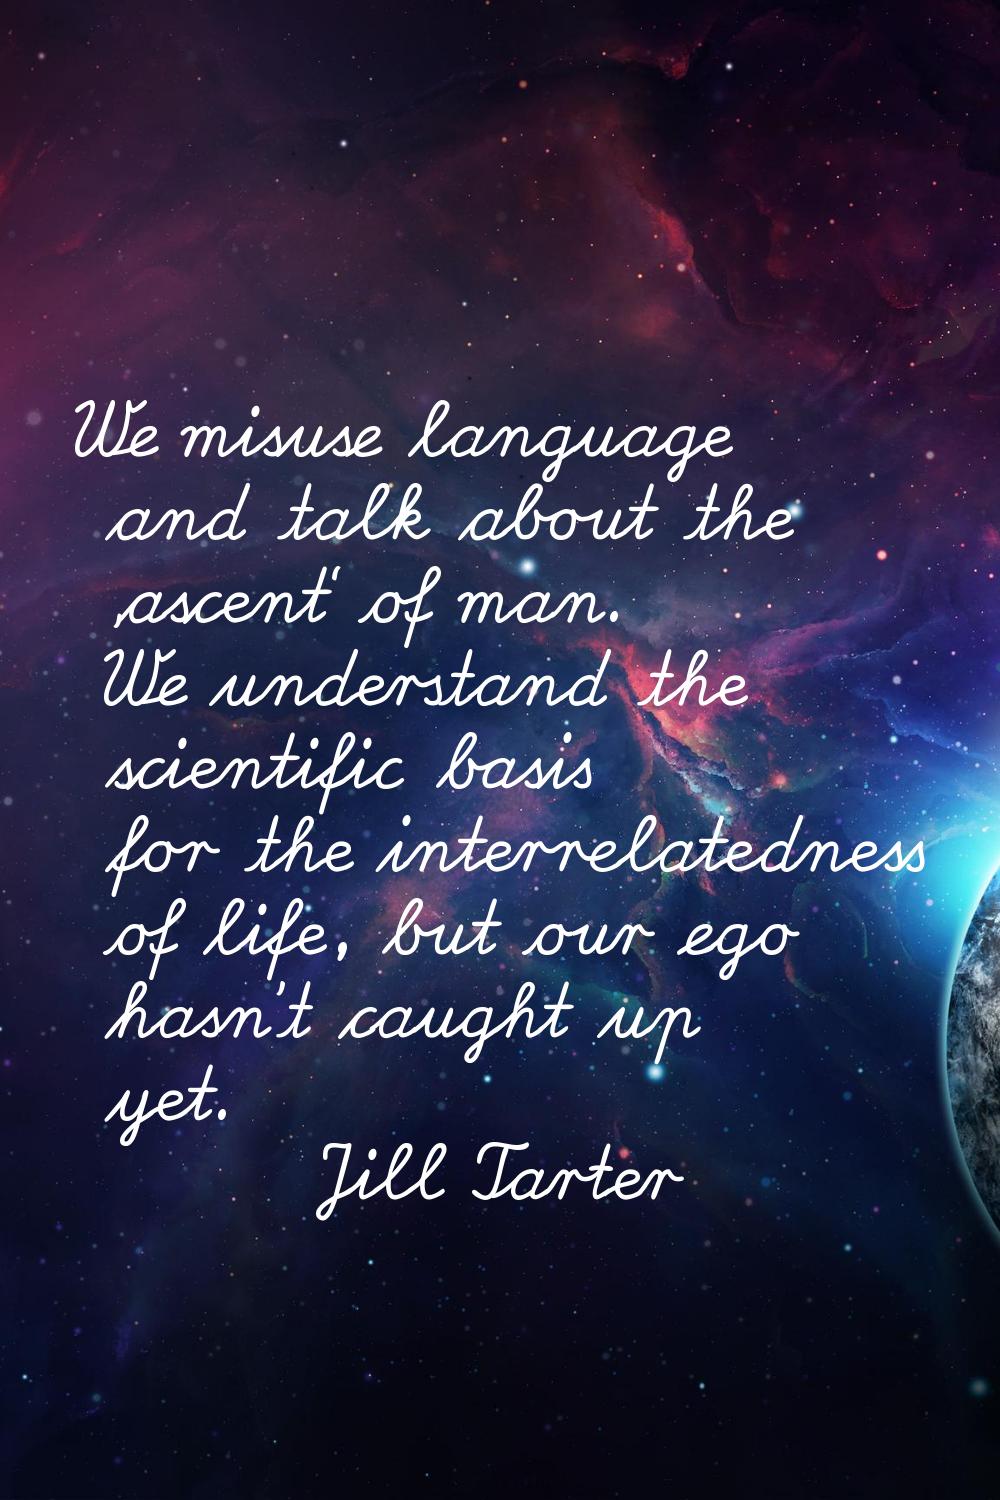 We misuse language and talk about the 'ascent' of man. We understand the scientific basis for the i